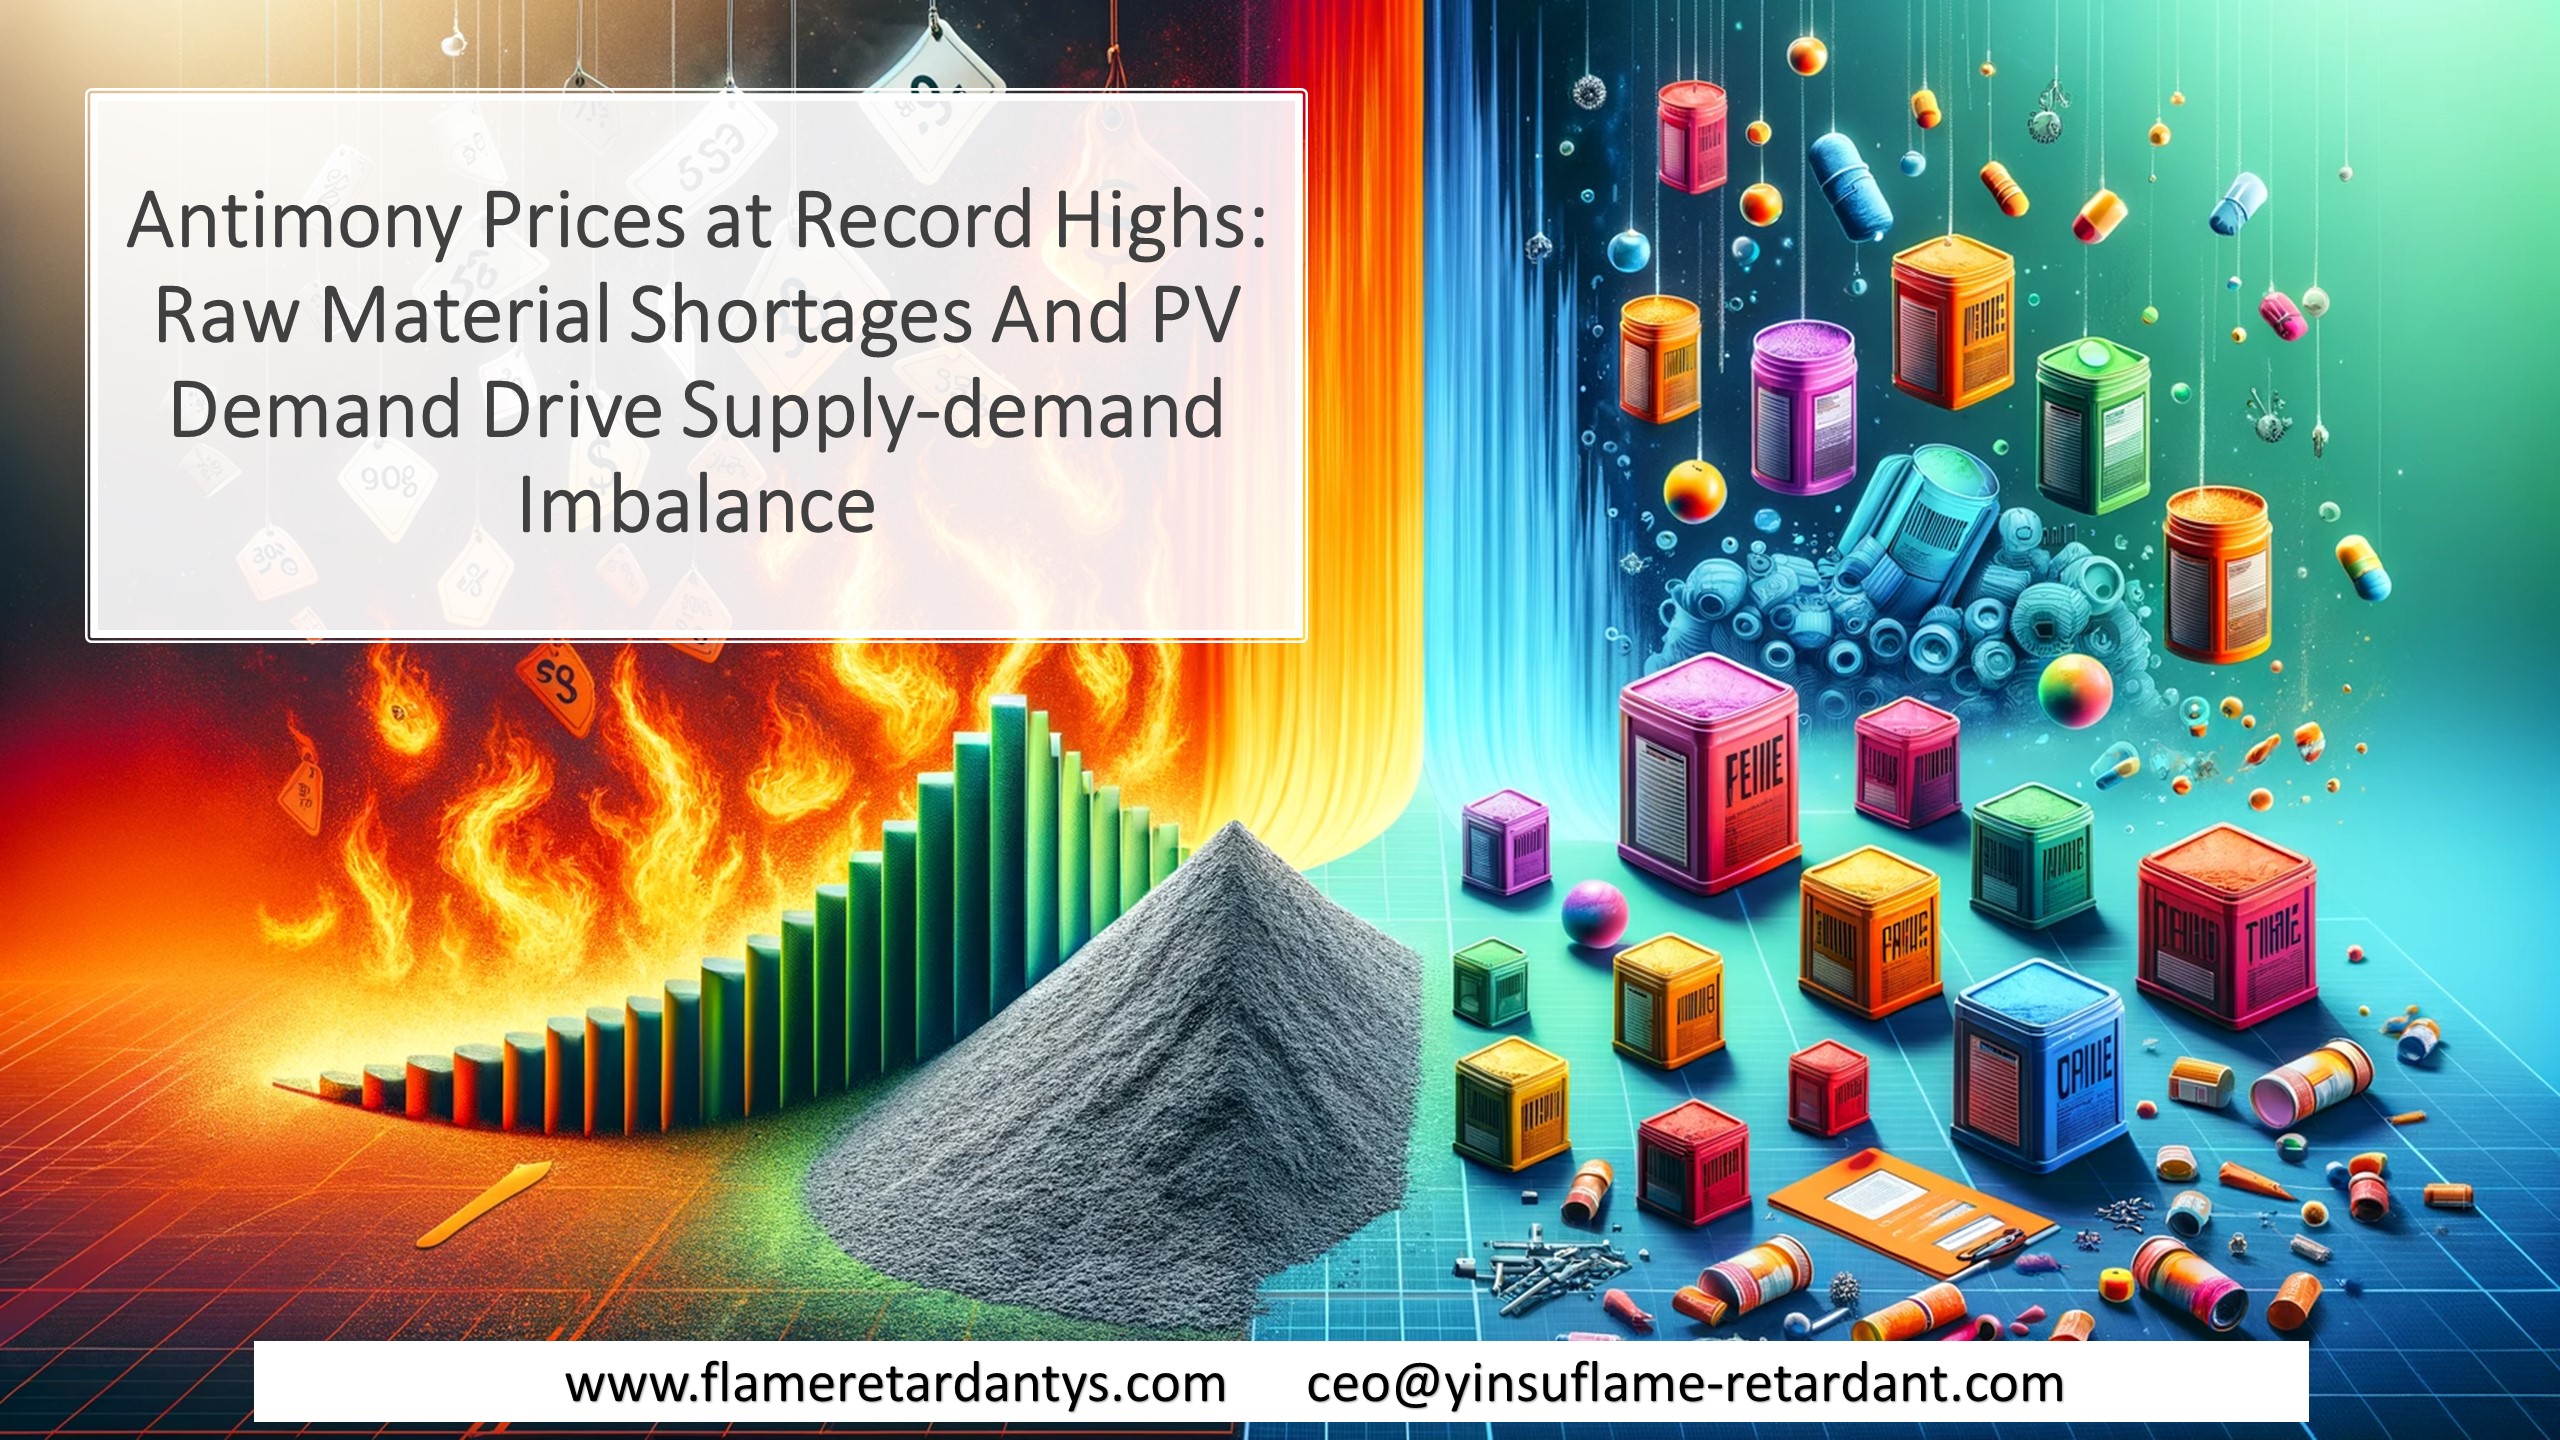 Antimony Prices at Record Highs: Raw Material Shortages And PV Demand Drive Supply-demand Imbalance